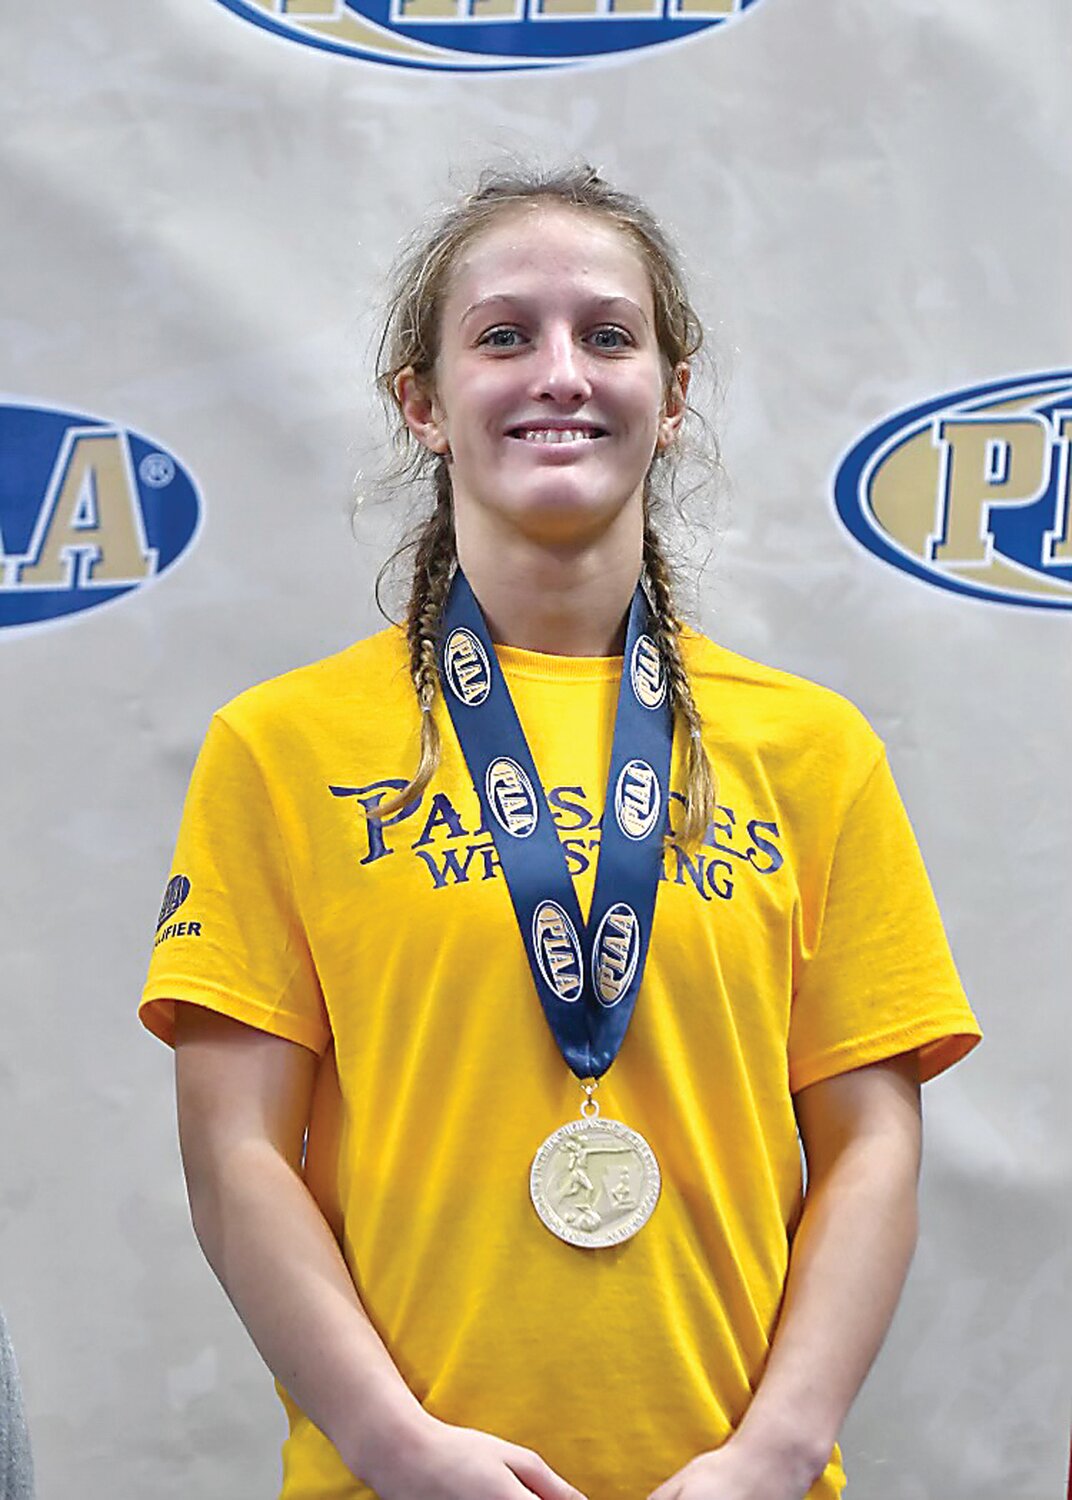 Palisades junior Savannah Witt made history earlier this month when she became the first PIAA girls wrestling champion in the 118-pound weight class.